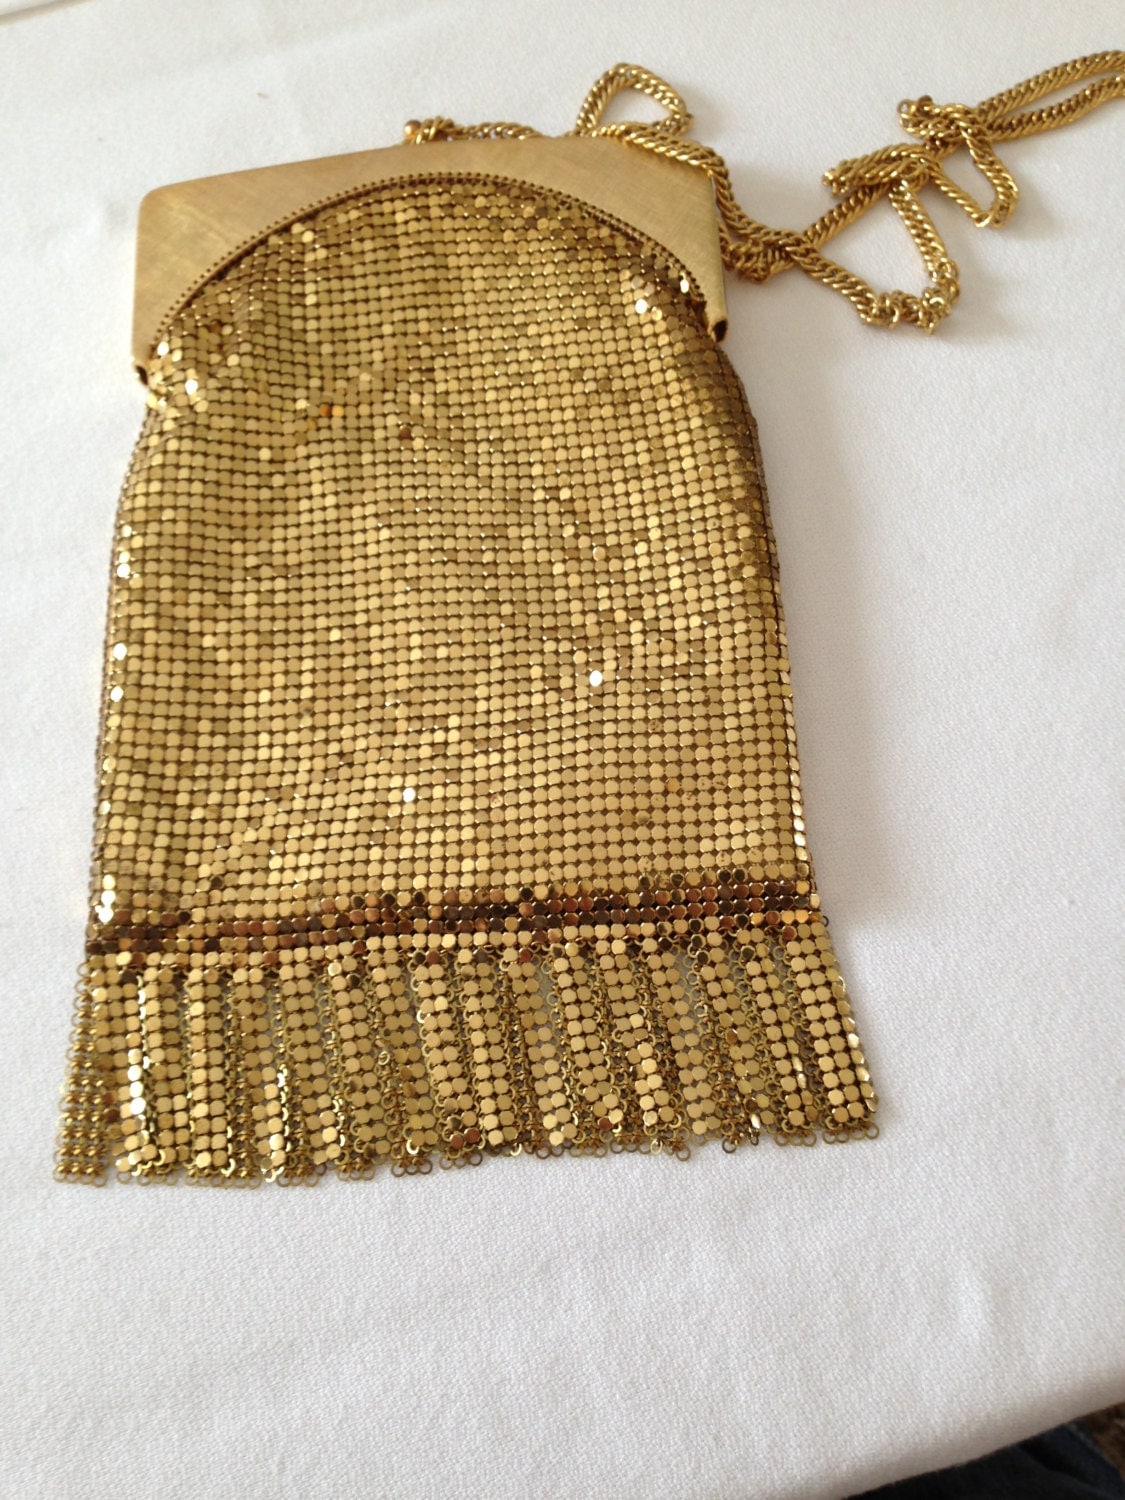 Vintage Whiting and Davis Gold Mesh Purse